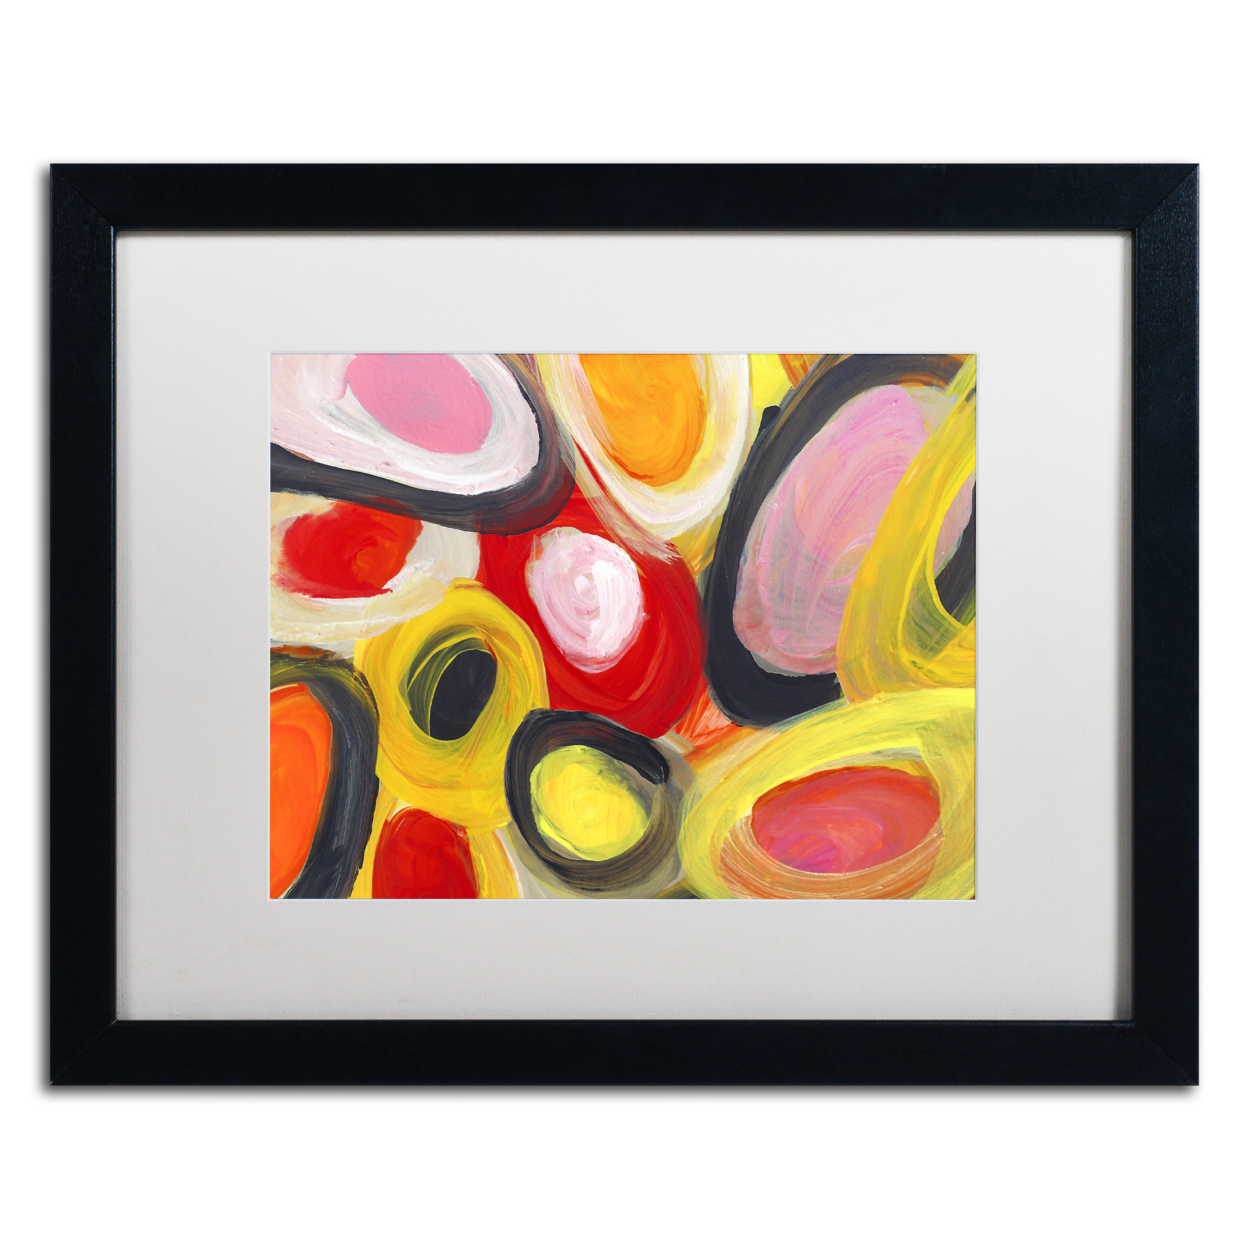 Amy Vangsgard 'Colorful Abstract Circles 3' Black Wooden Framed Art 18 X 22 Inches